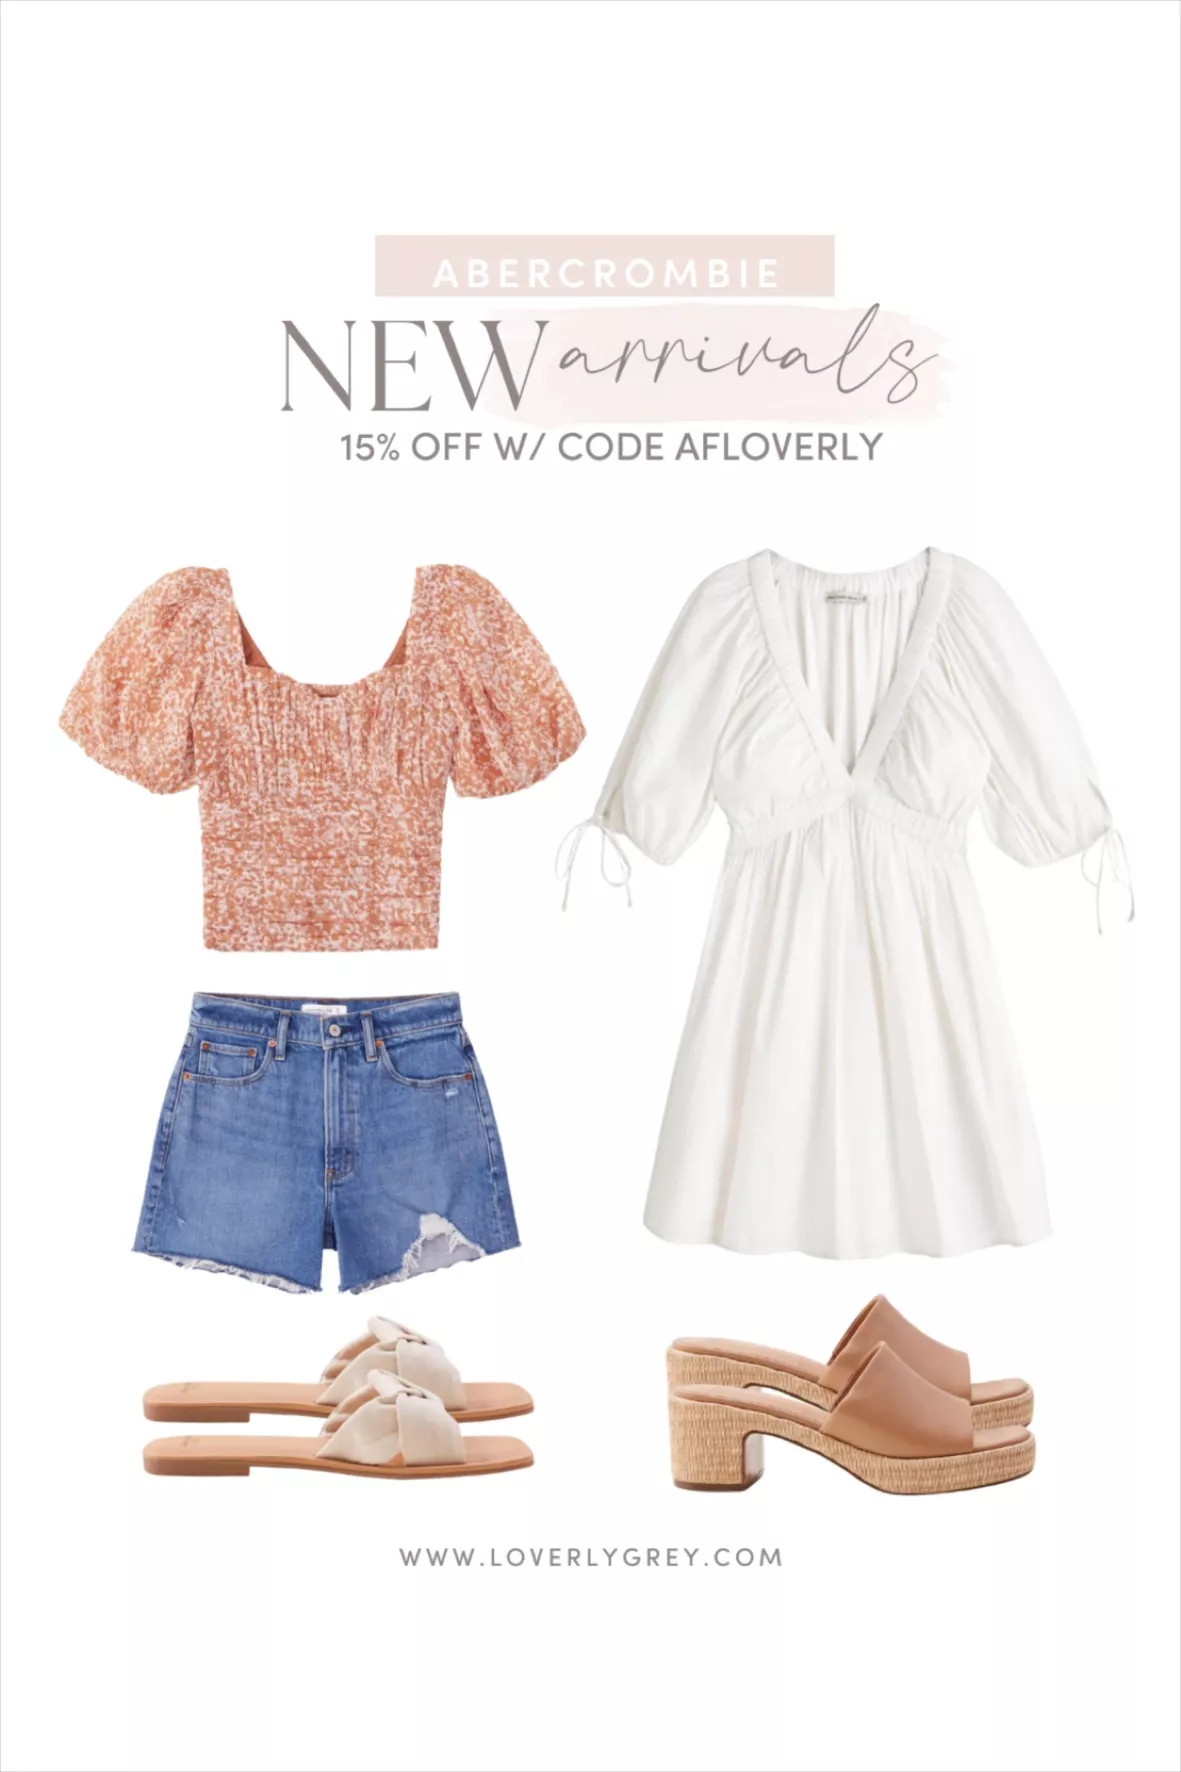 Abercrombie New Spring Arrivals - The Best New Beach Worthy Pieces